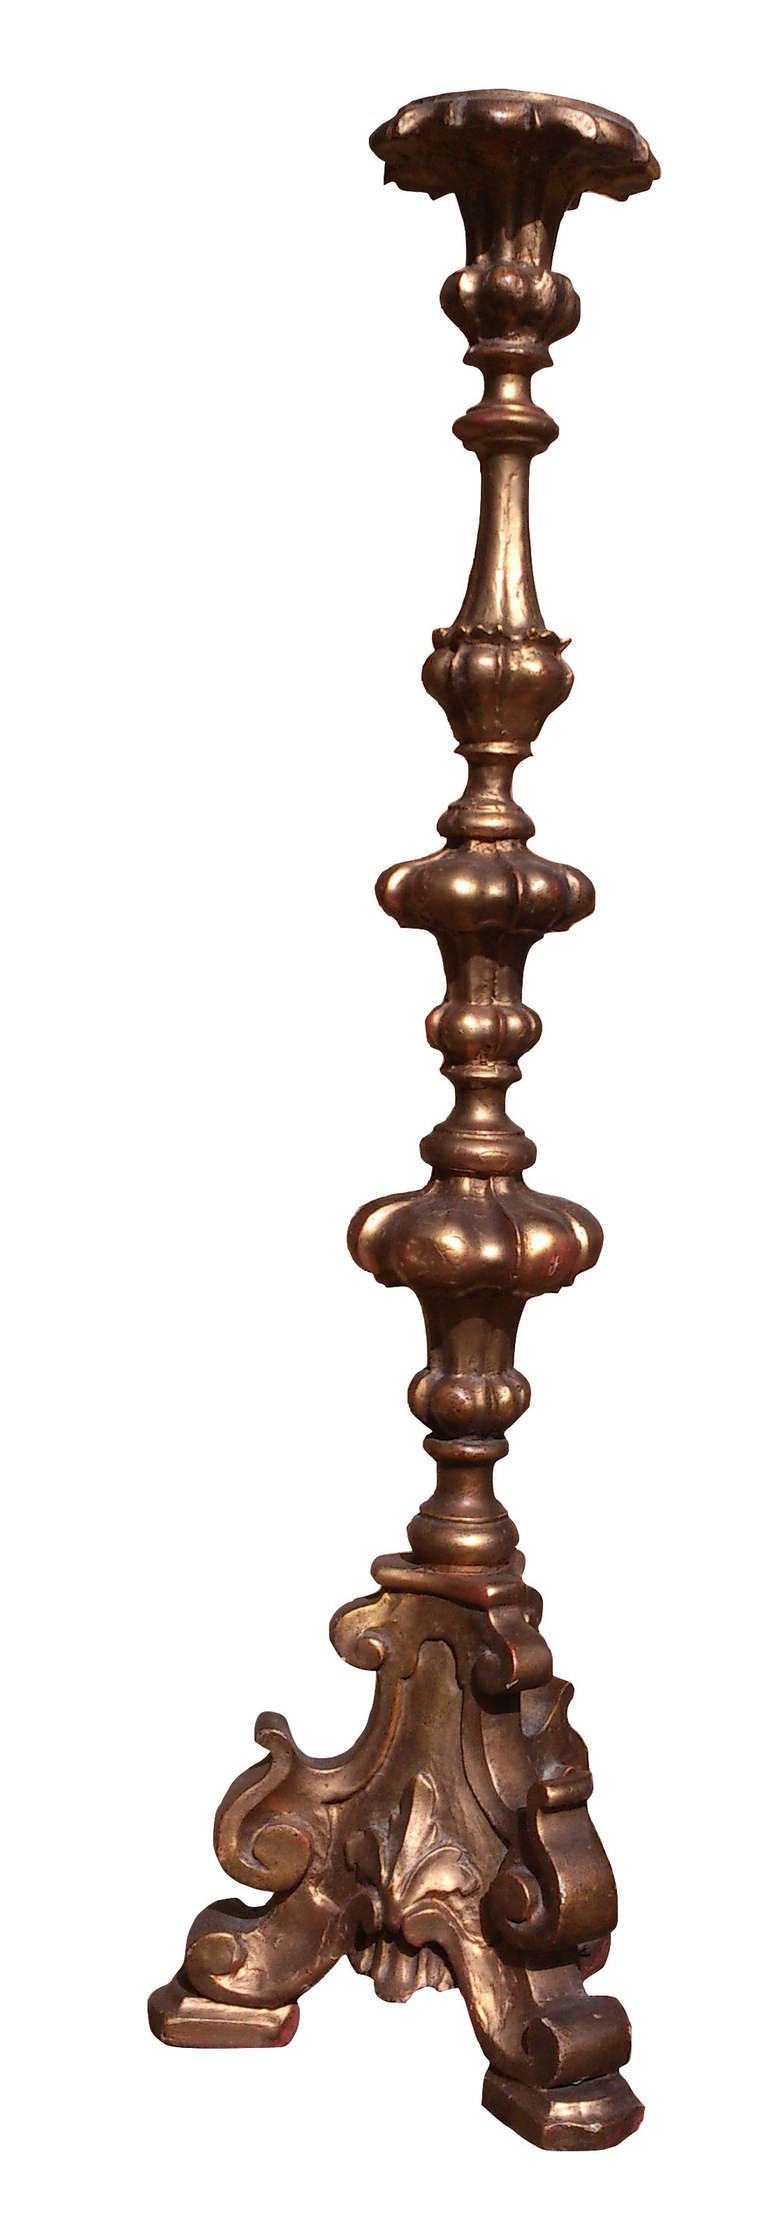 Large floor standing Rococco / classical transitional period gilt torchere standing on triform base with fleur des lys between each leg. 

Italian circa 1760 

38 1/2